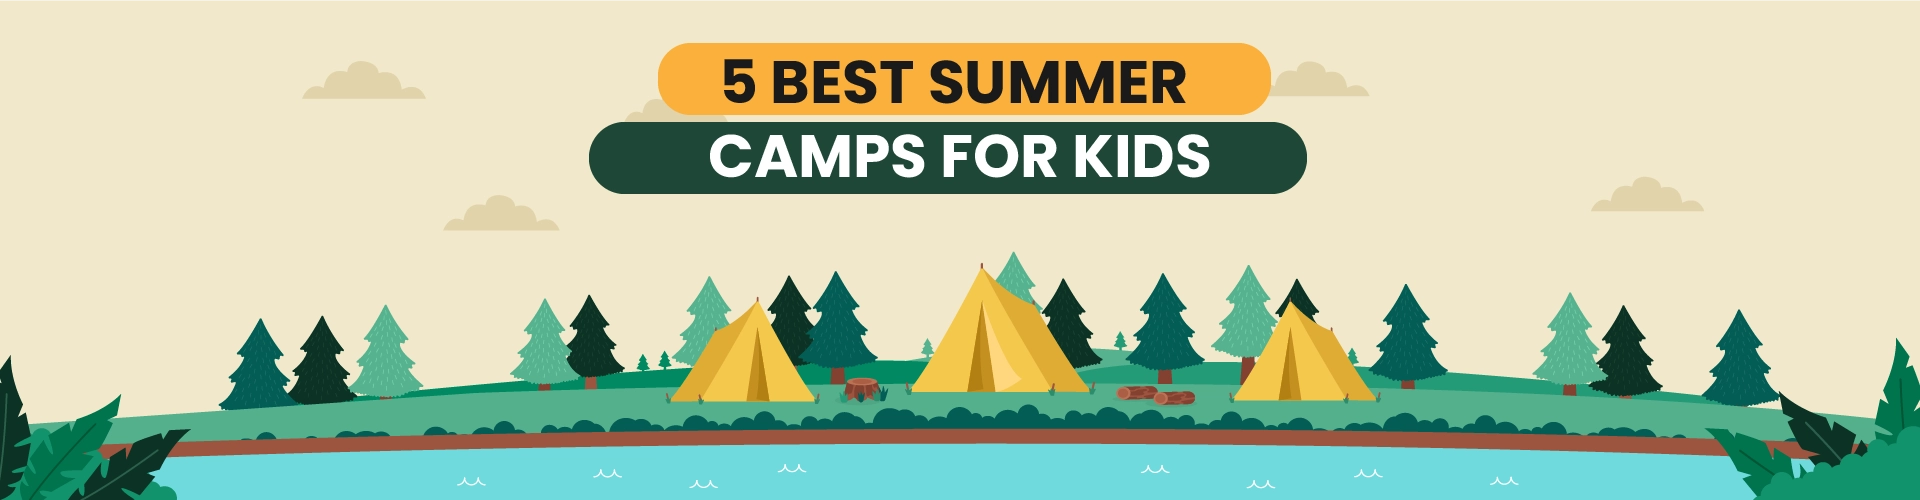 Top 5 Summer Camps For Kids